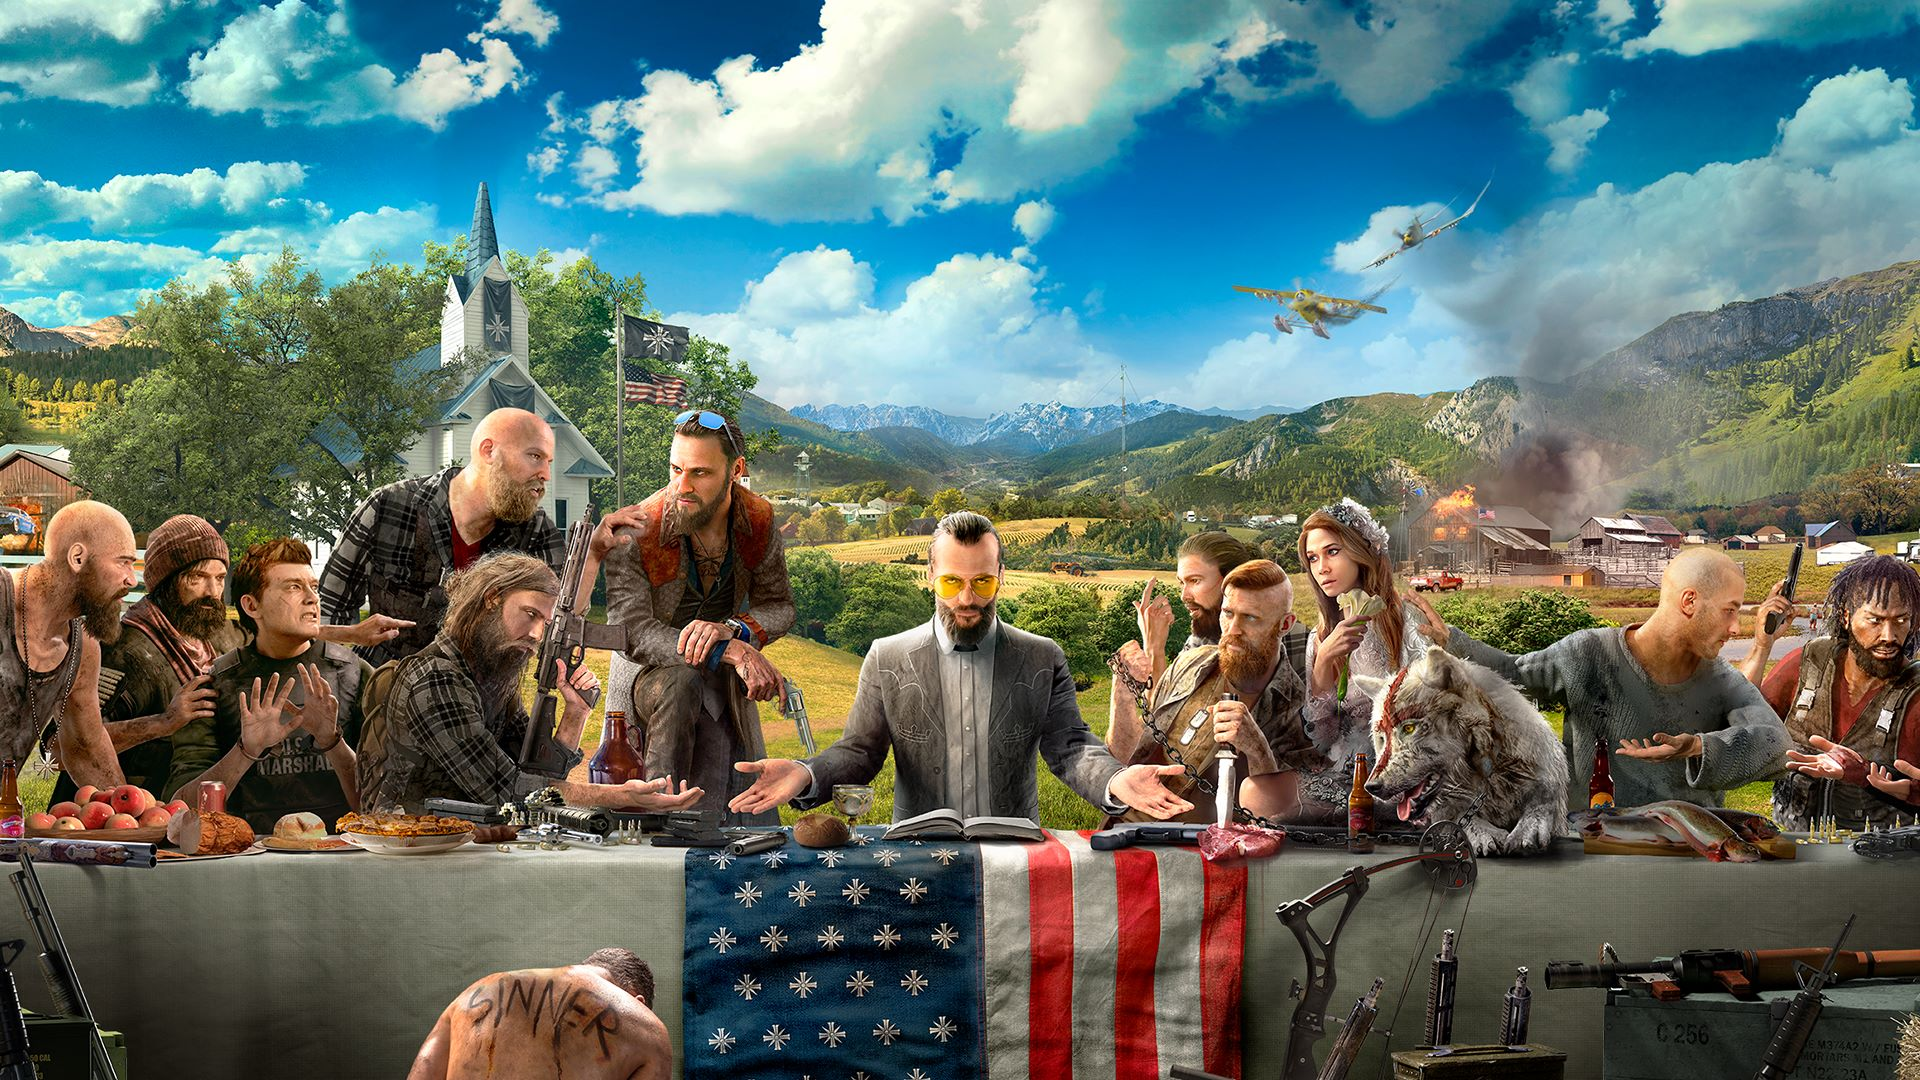 Far Cry 5 Gold Edition + Far Cry New Dawn Deluxe Edition Bundle Steam  Altergift